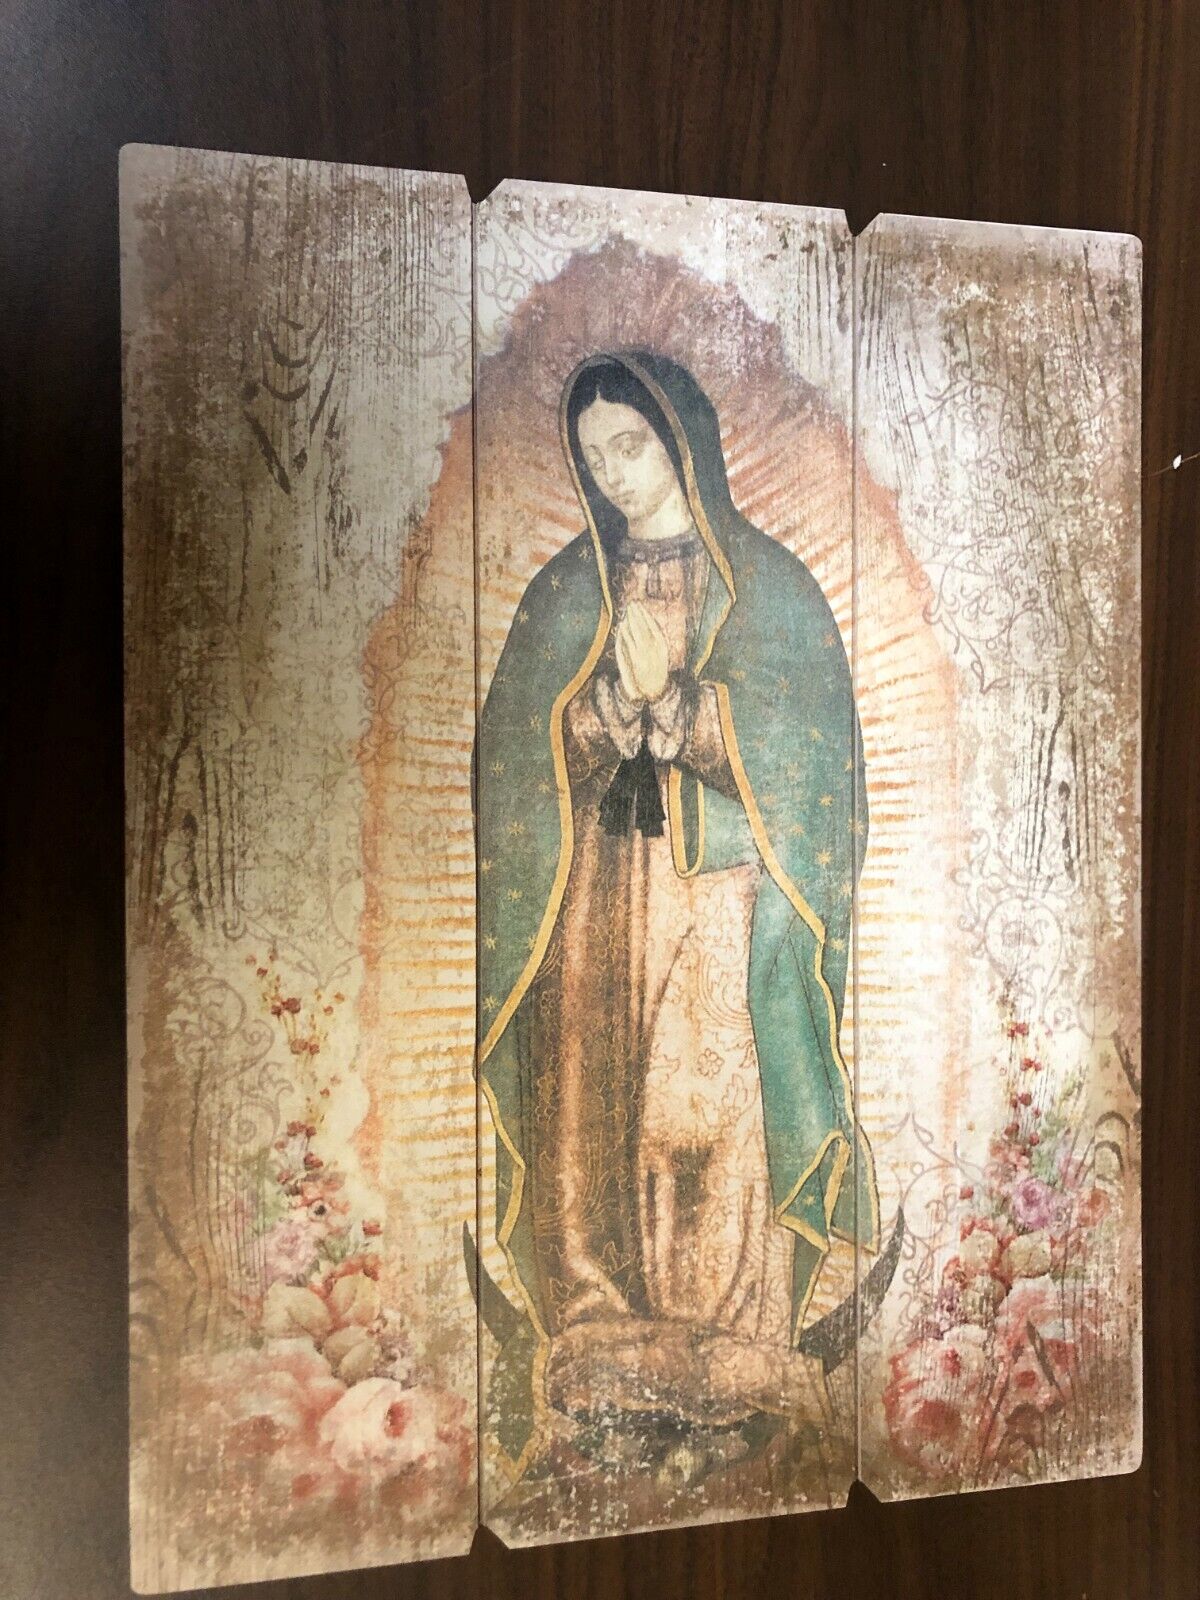 Our Lady of Guadalupe Image set on Wood Pallet,  New - Bob and Penny Lord